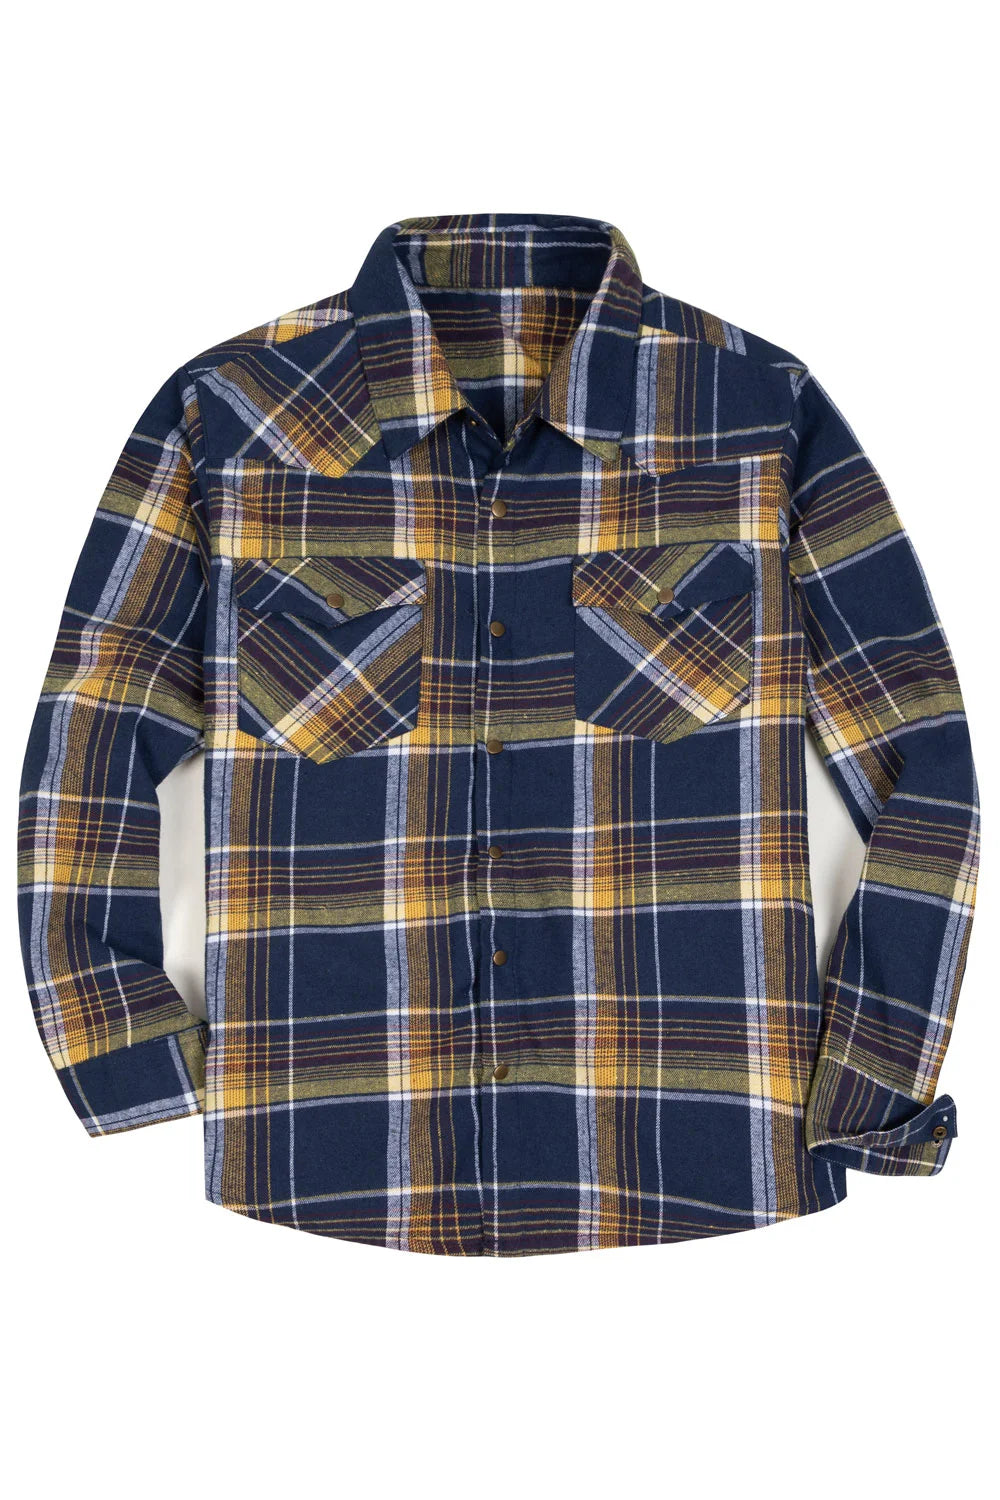 Men's Snap Front Long Sleeve Plaid Western Flannel Shirt